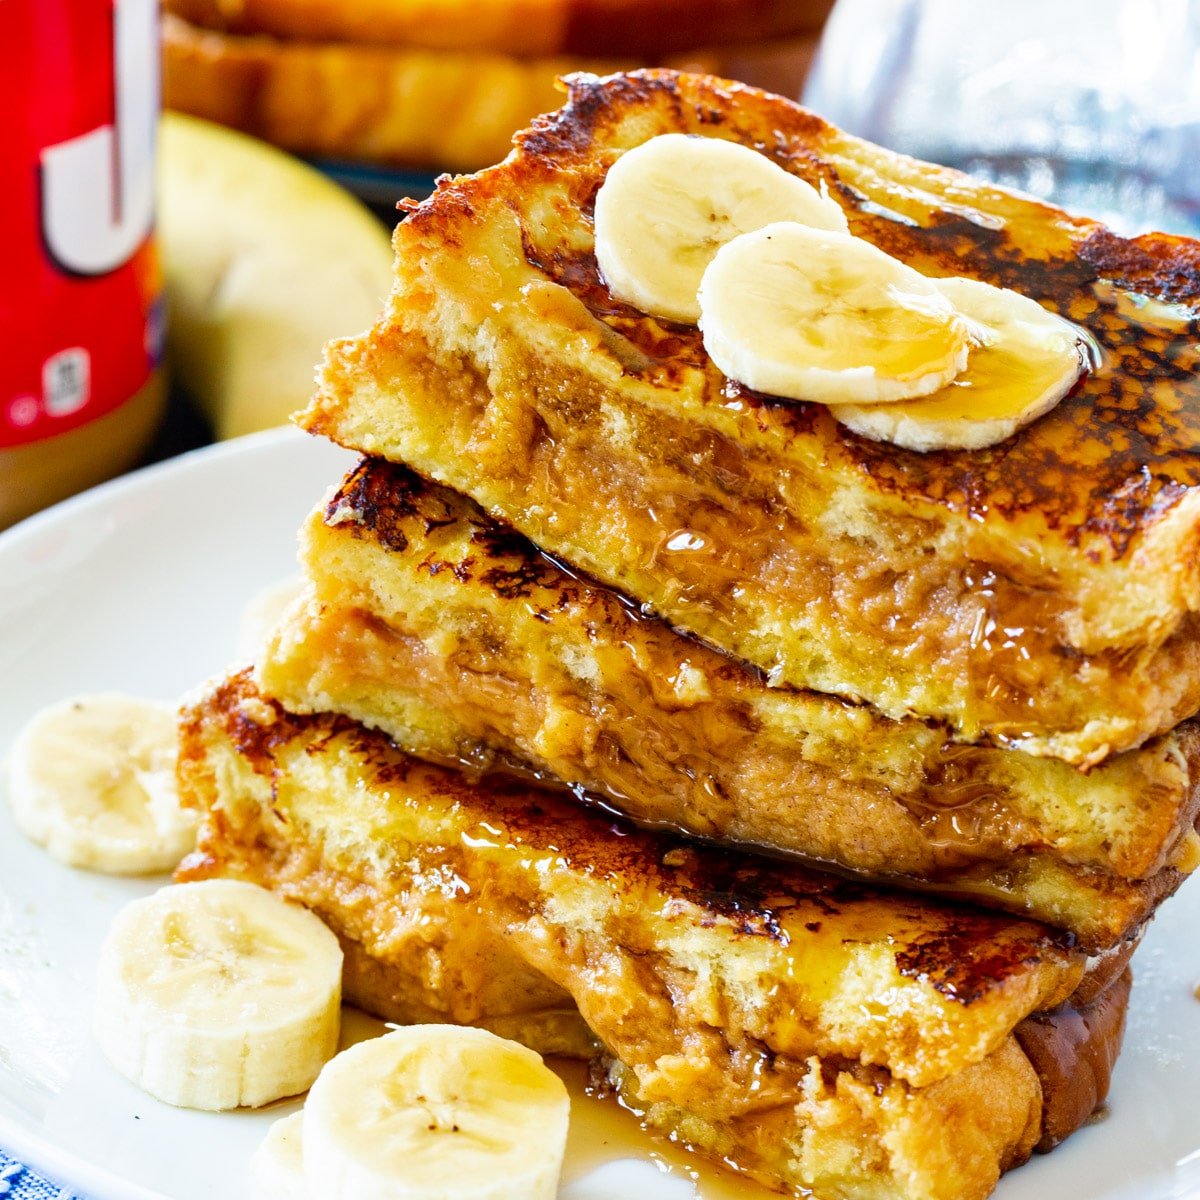 Peanut Butter Stuffed French Toast stacked on a plate.